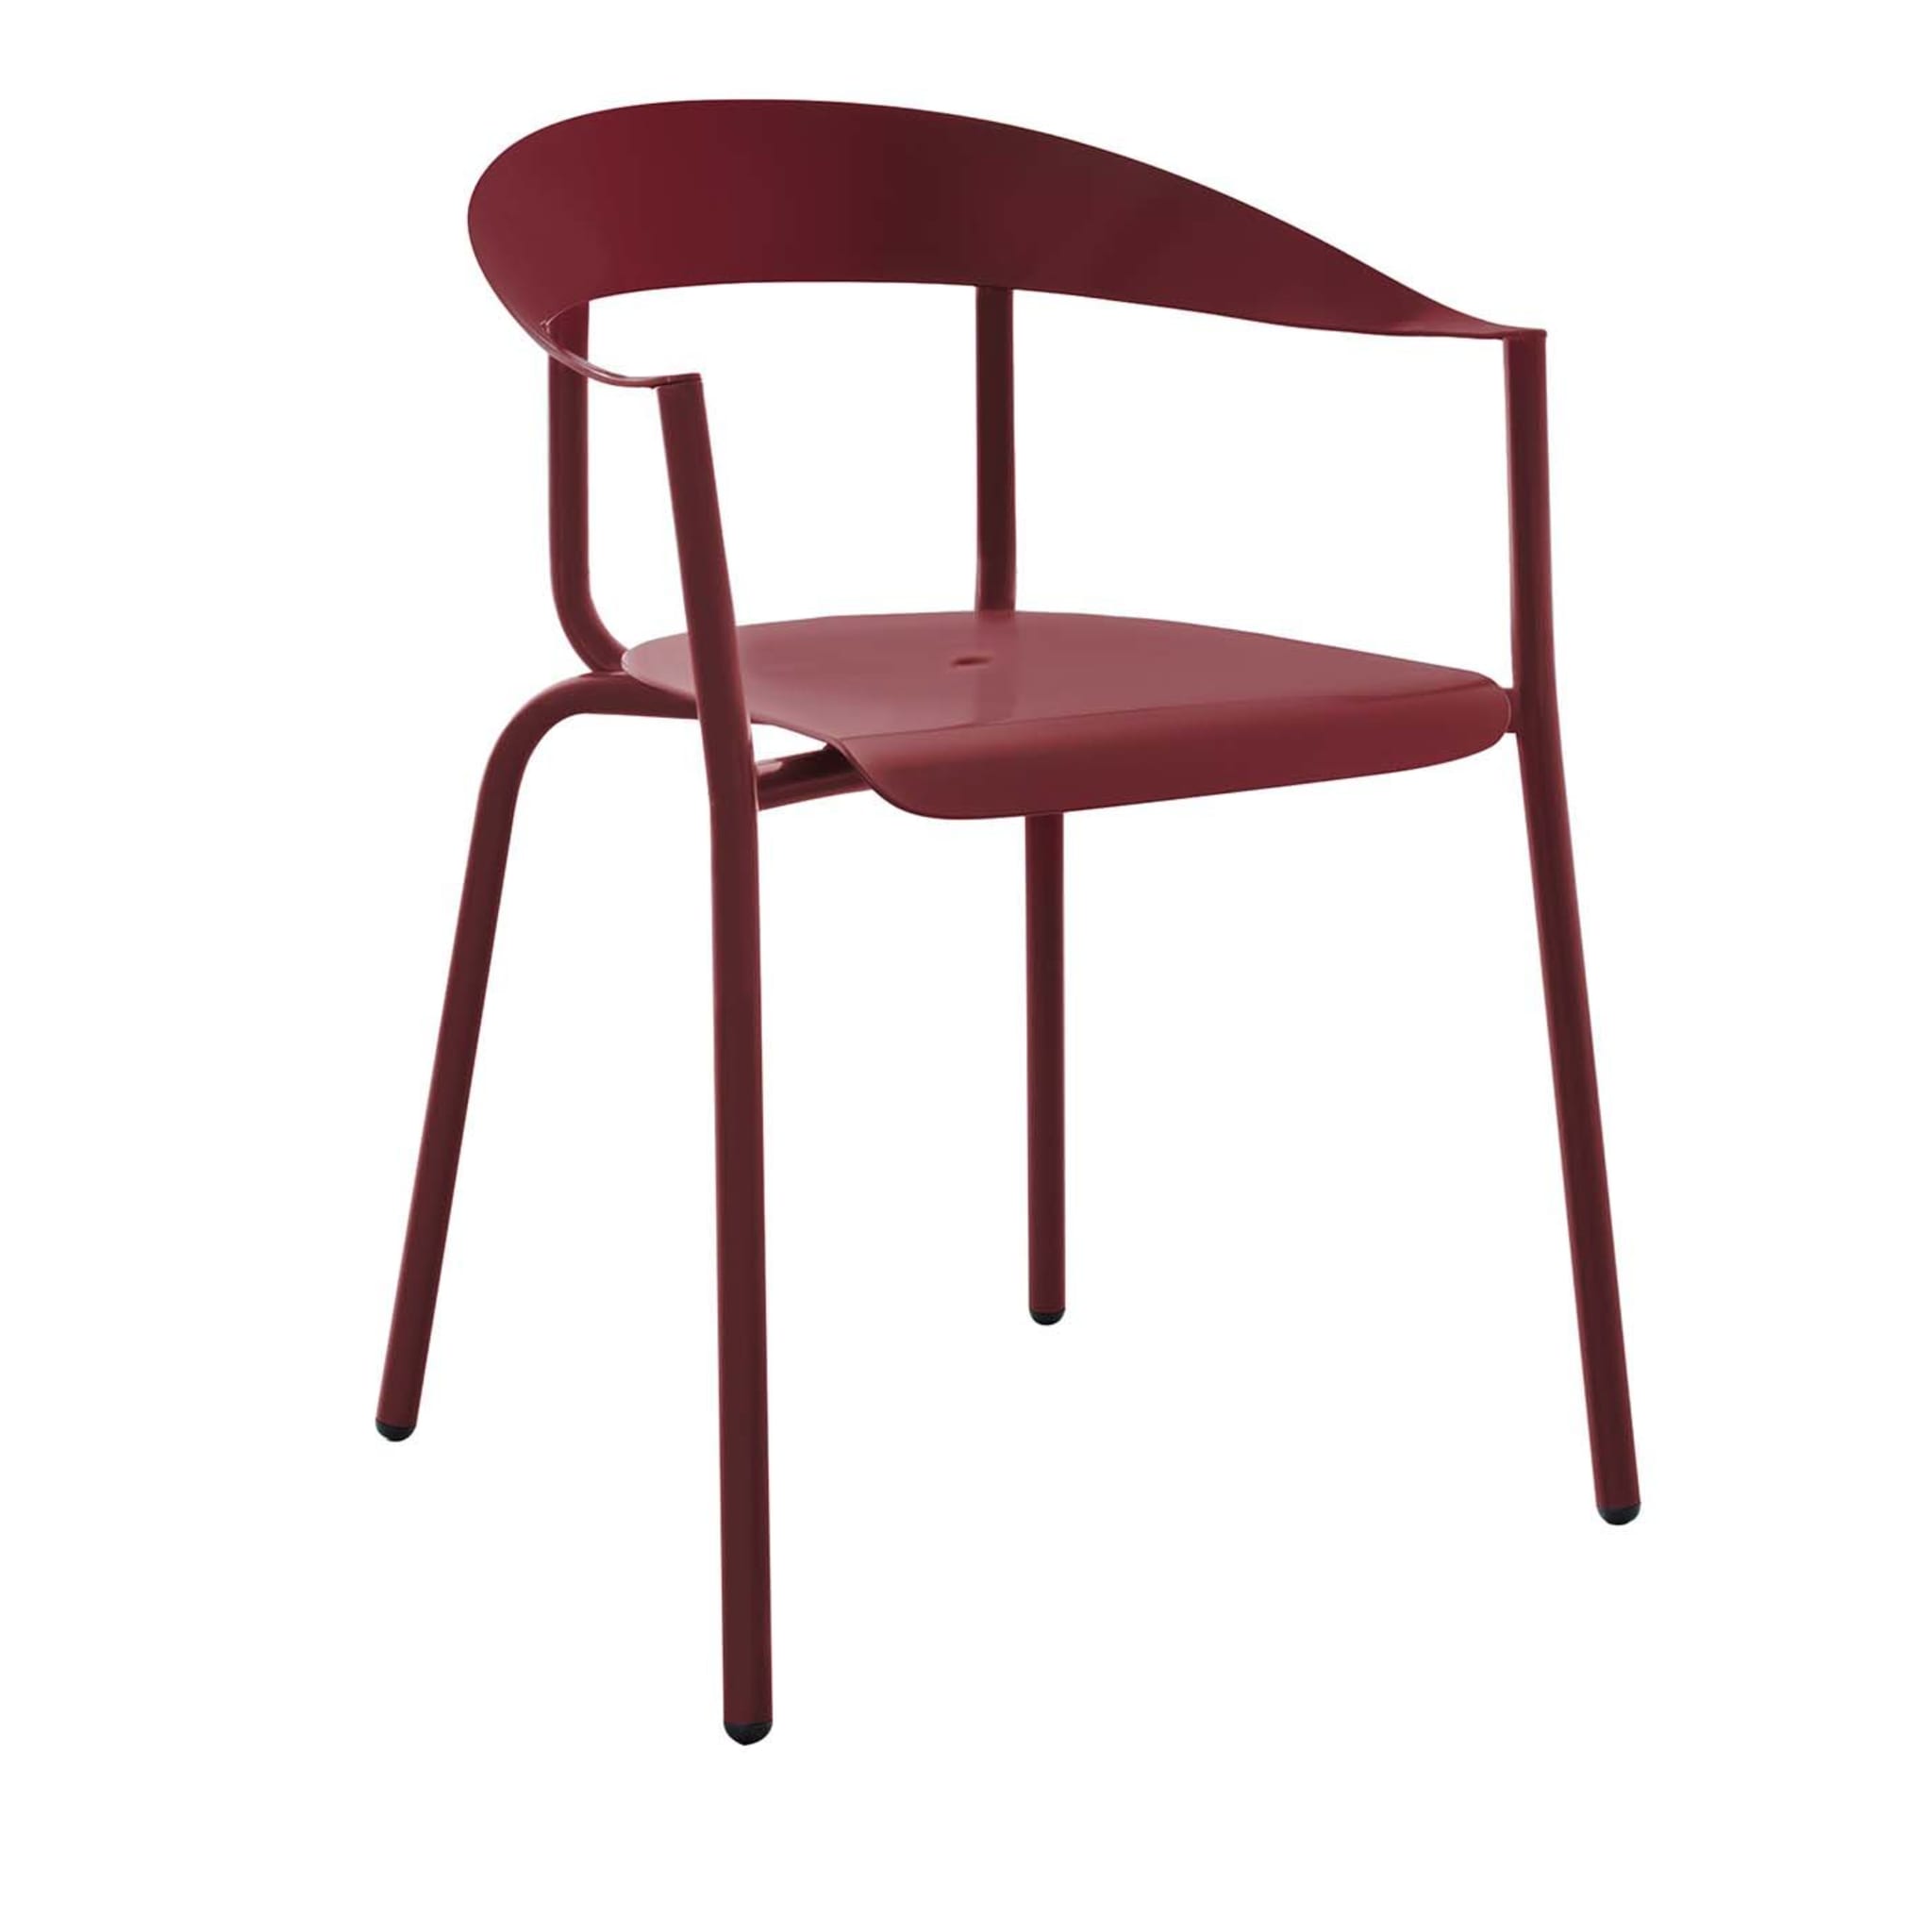 Red AluMito Chair with Armrests by Pascal Bosetti - Main view